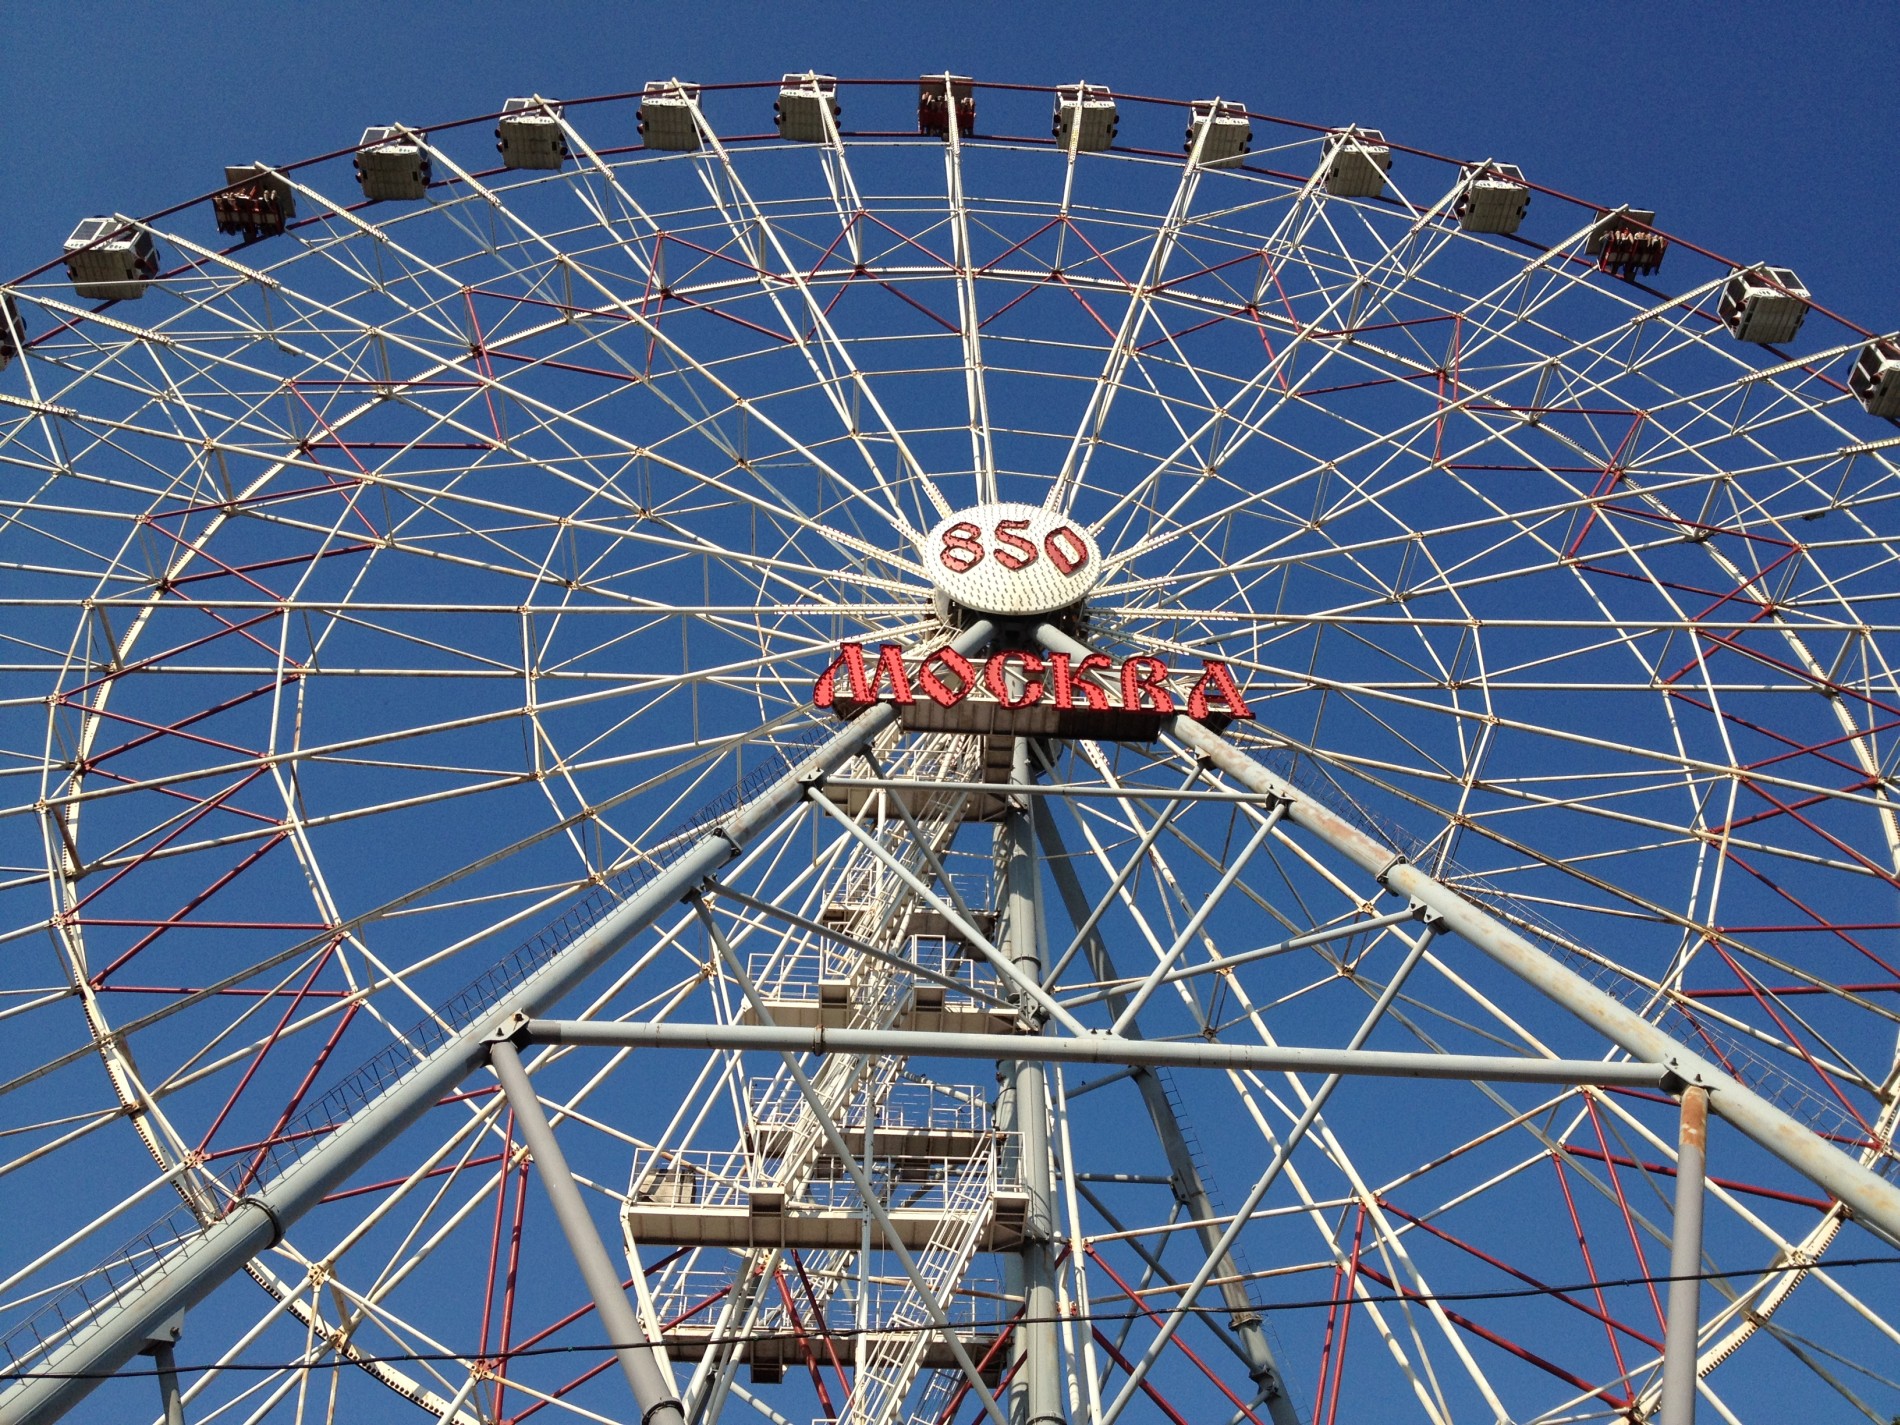 A Western-style ferris wheel entertains visitors to the All-Russia Exhibition Centre (VVC).